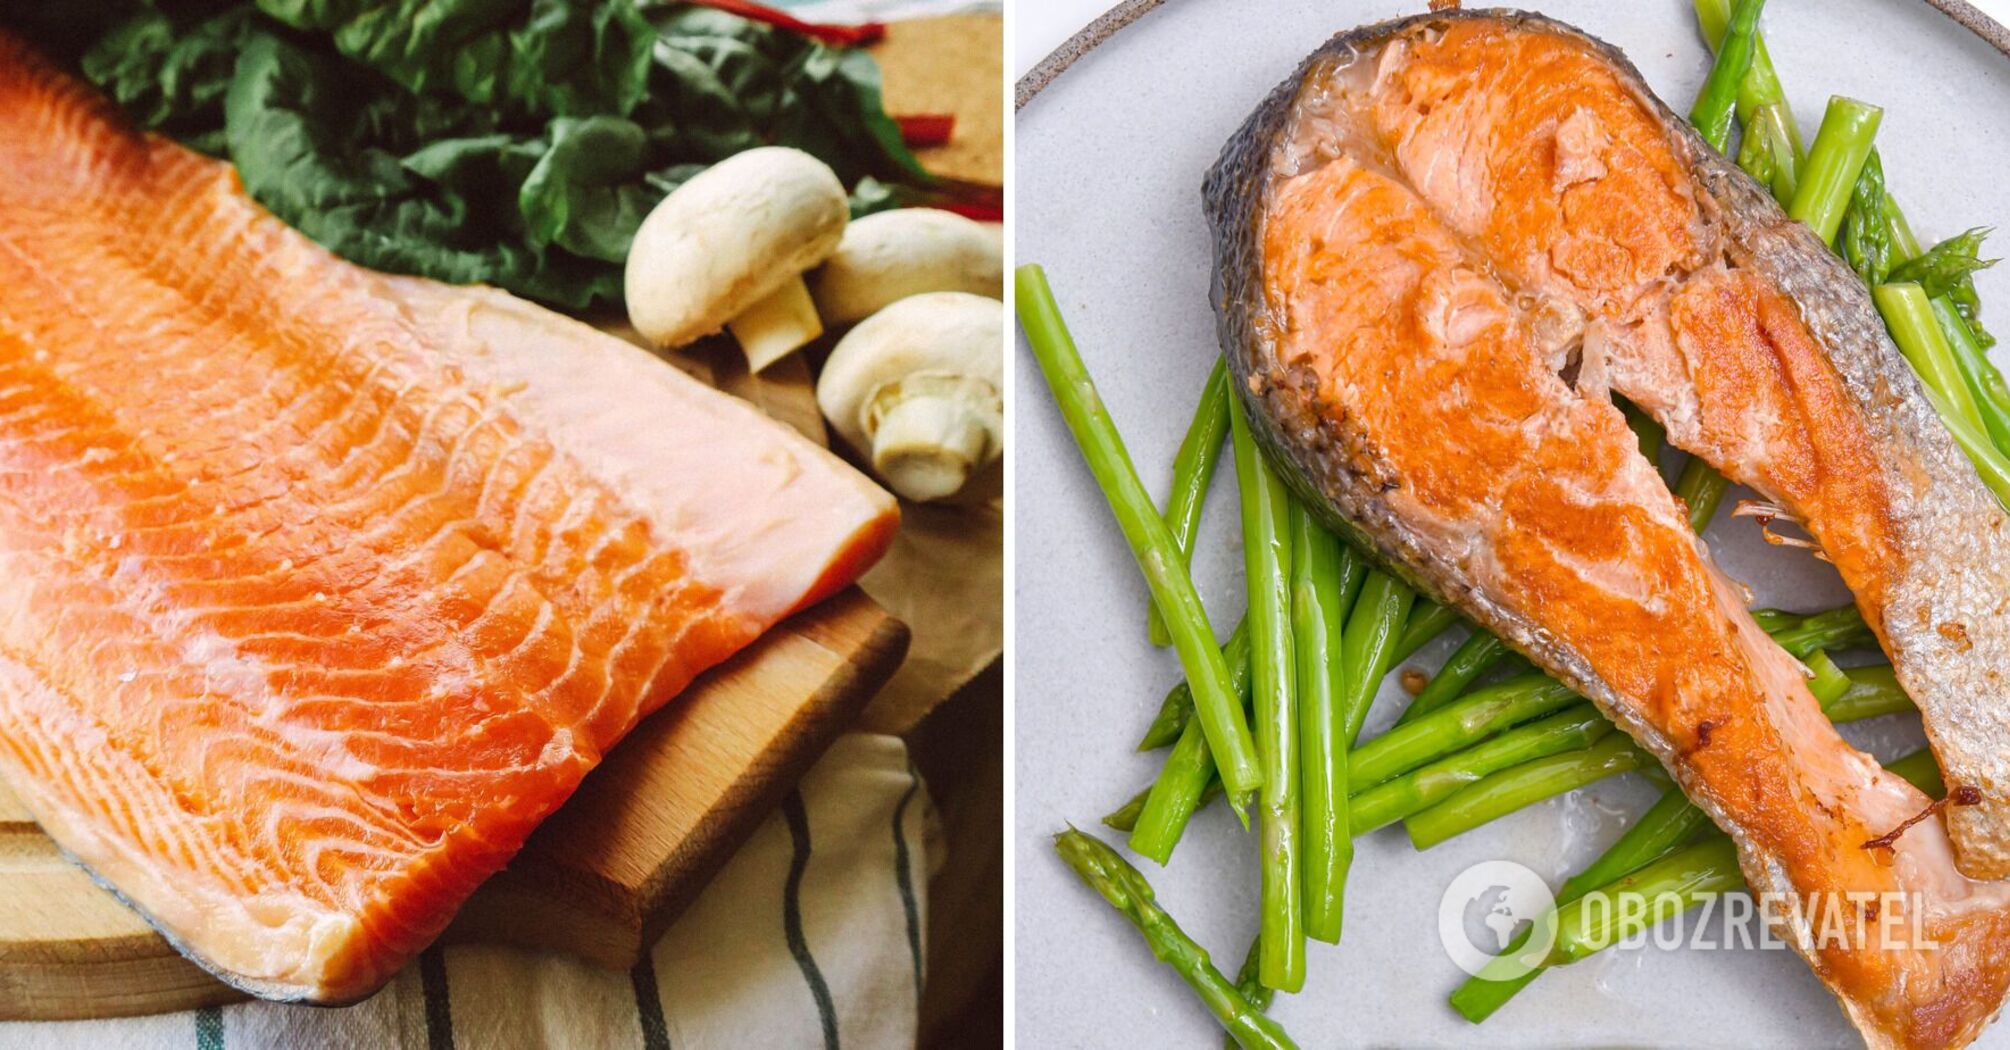 How to cook salmon deliciously